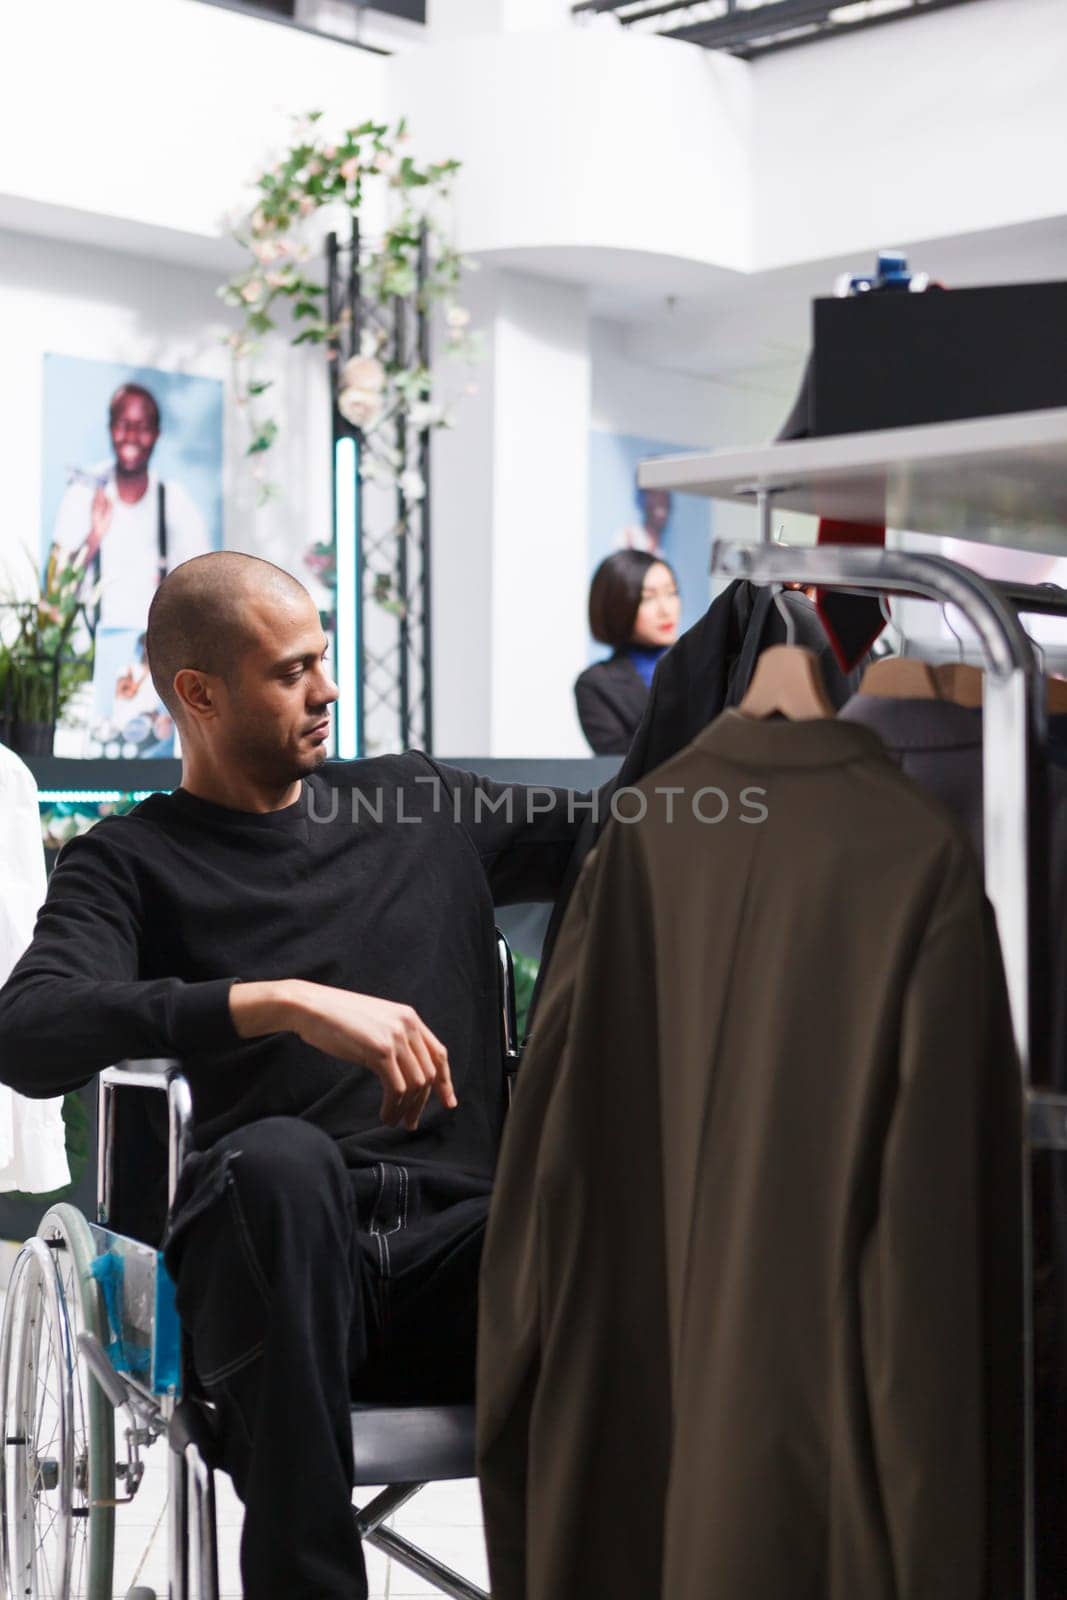 Arab man client in wheelchair choosing formal jacket and browsing through display rack in retail center showroom. Buyer with physical disability shopping for outfit in clothing store